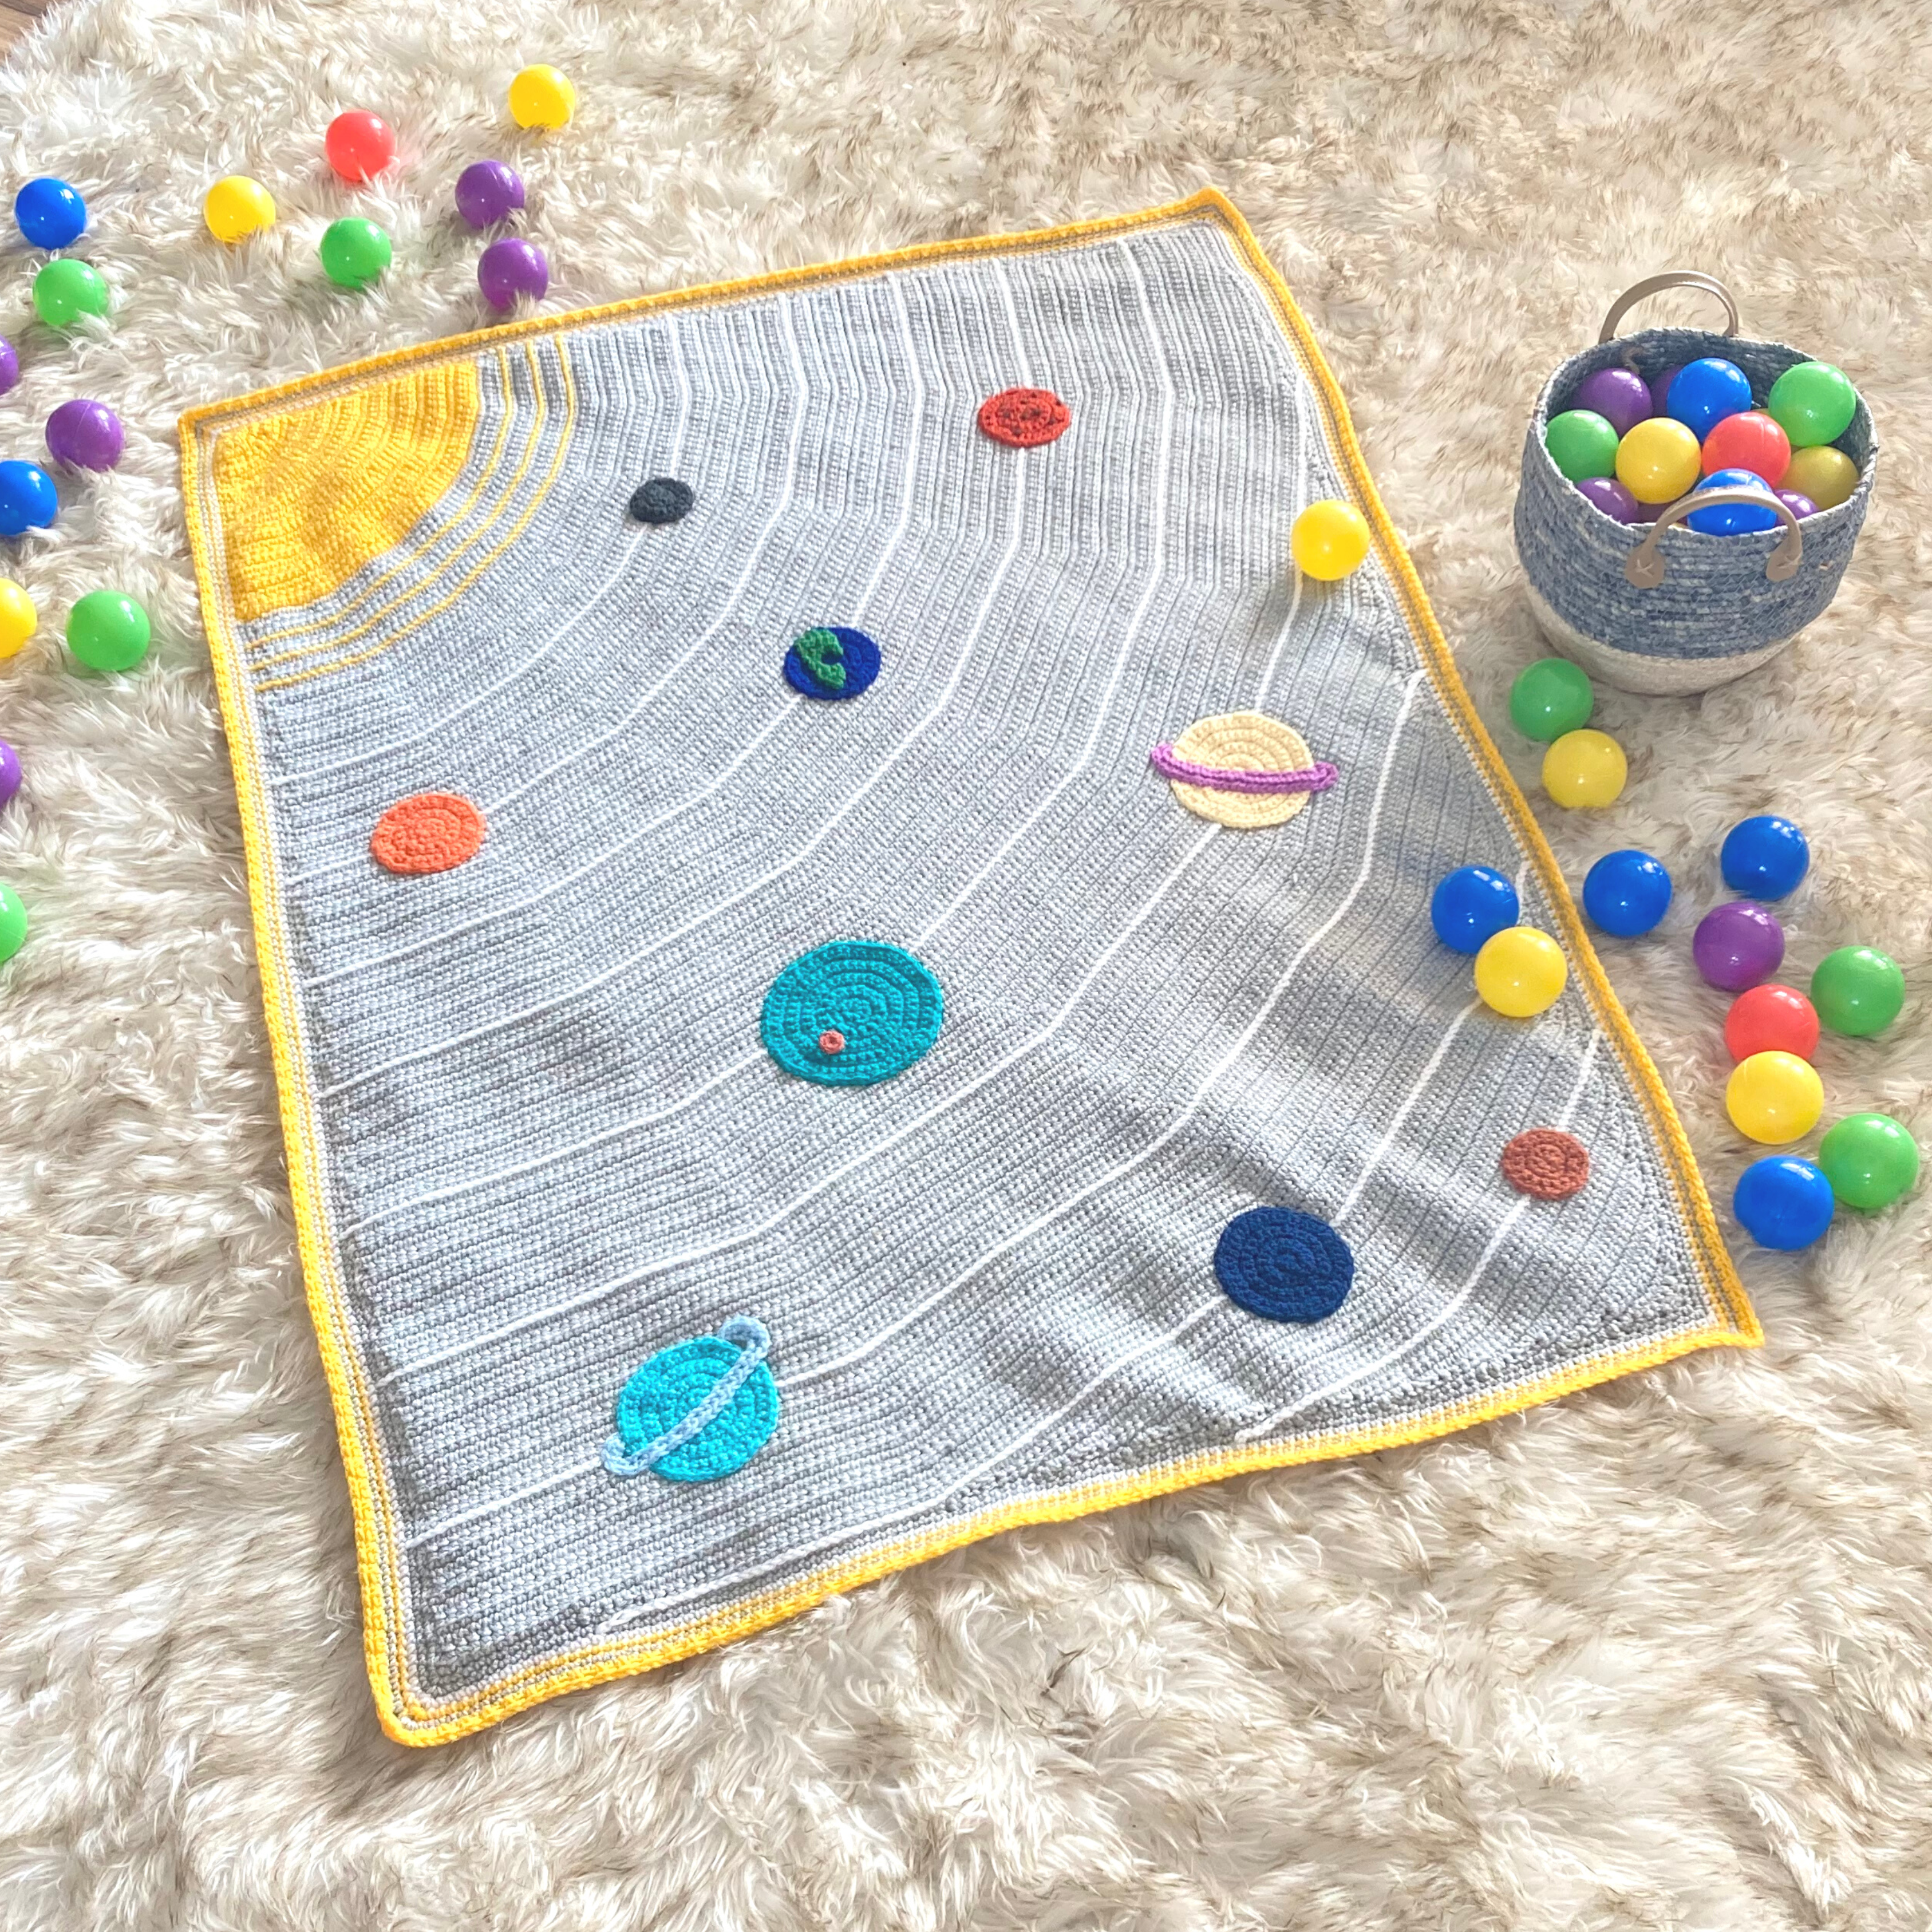 You are currently viewing Space Crochet Blanket with Planets